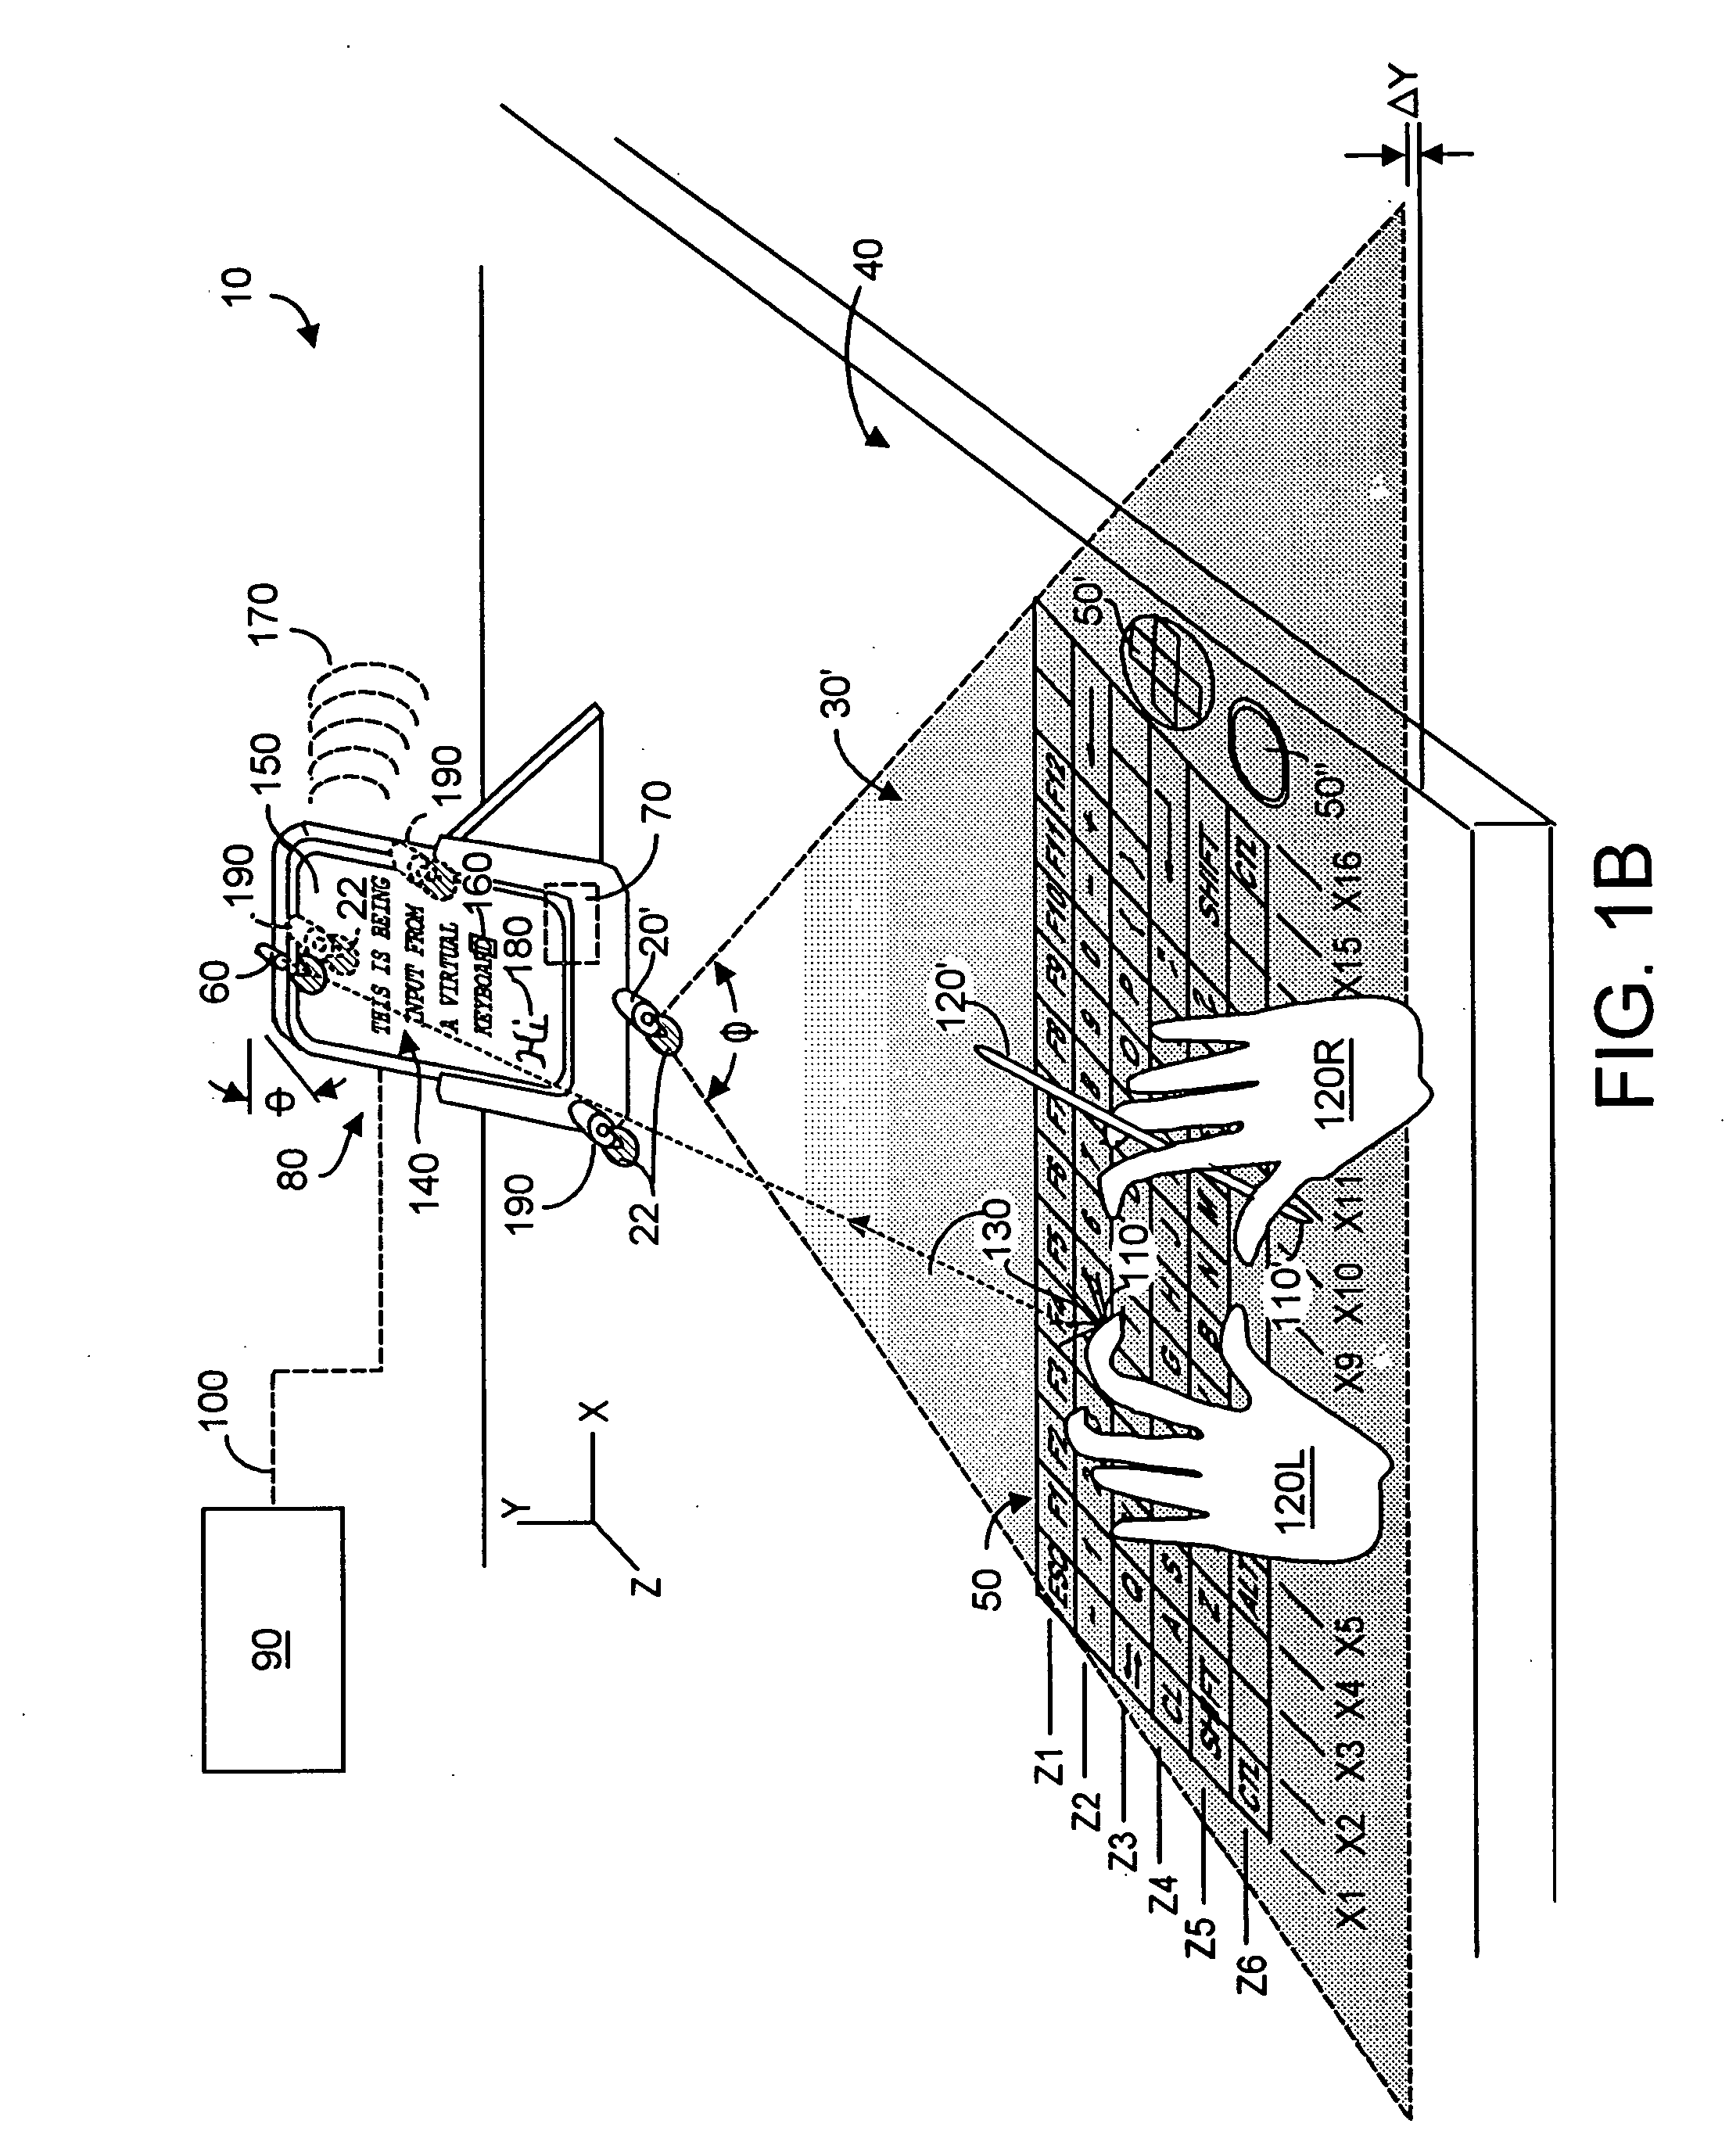 Quasi-three-dimensional method and apparatus to detect and localize interaction of user-object and virtual transfer device